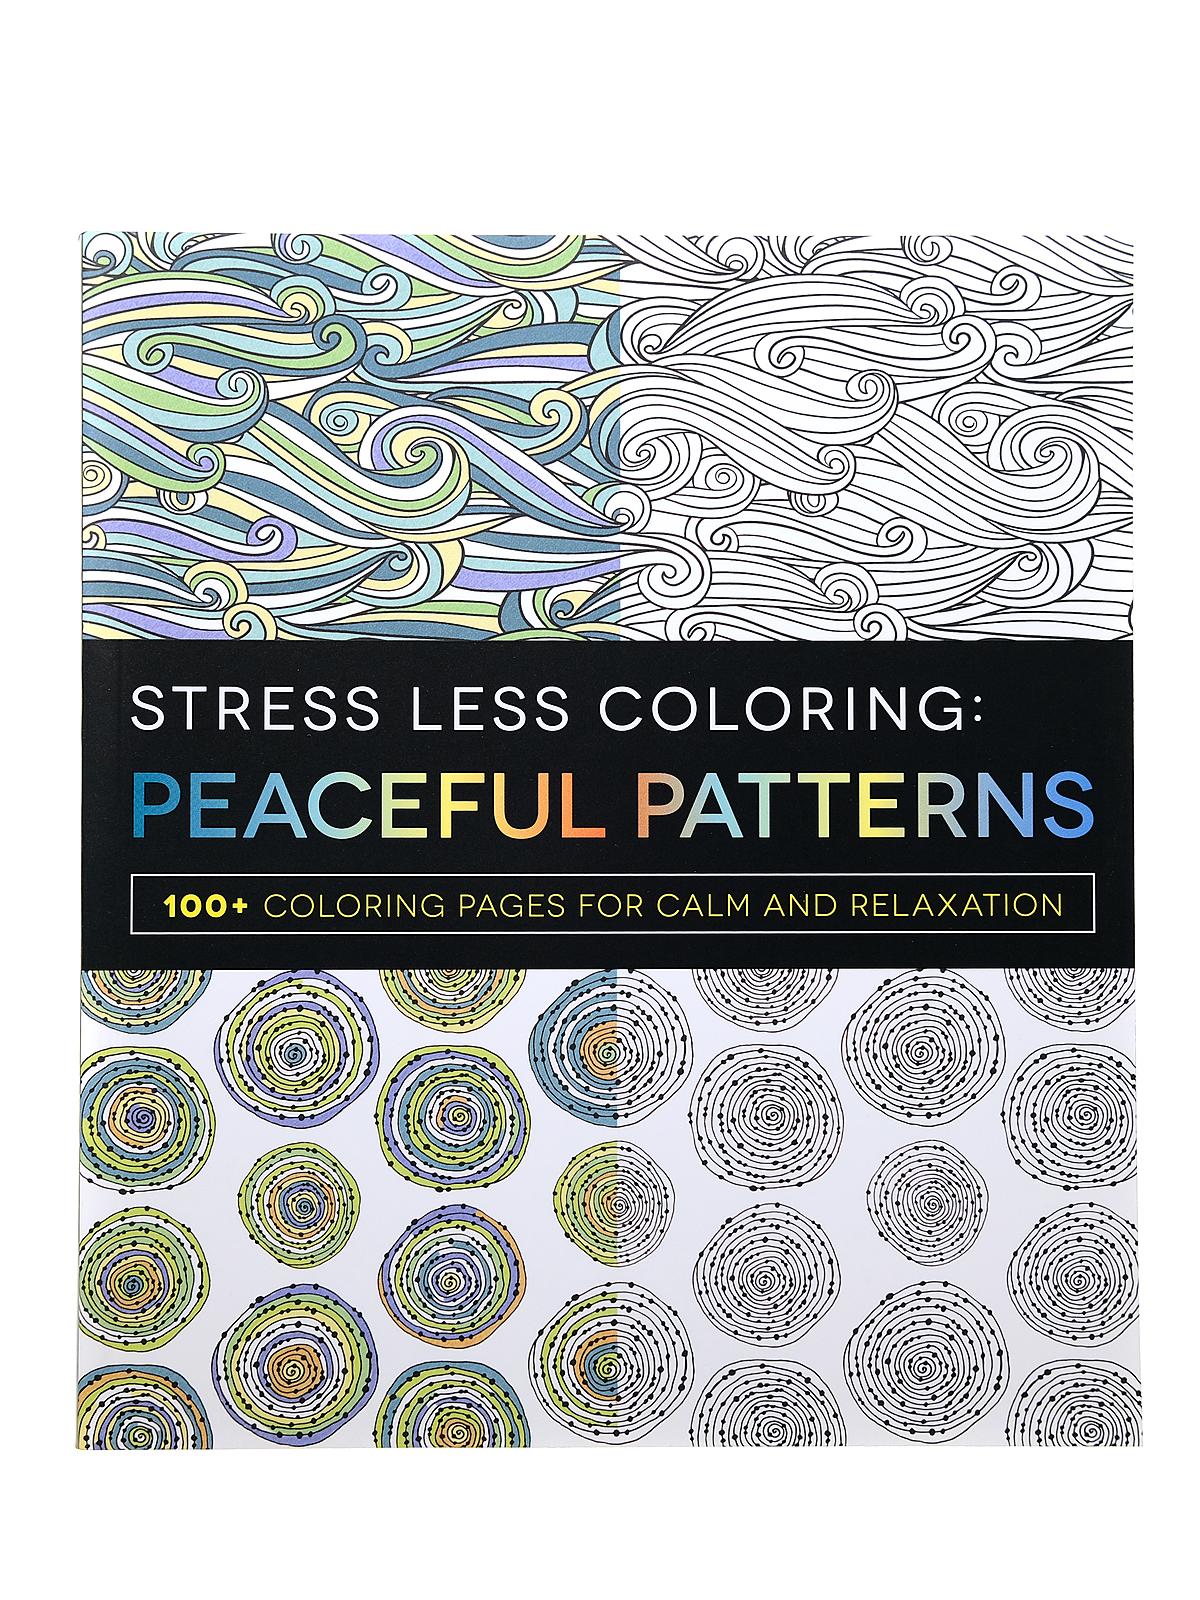 Stress Less Coloring Book Peaceful Patterns